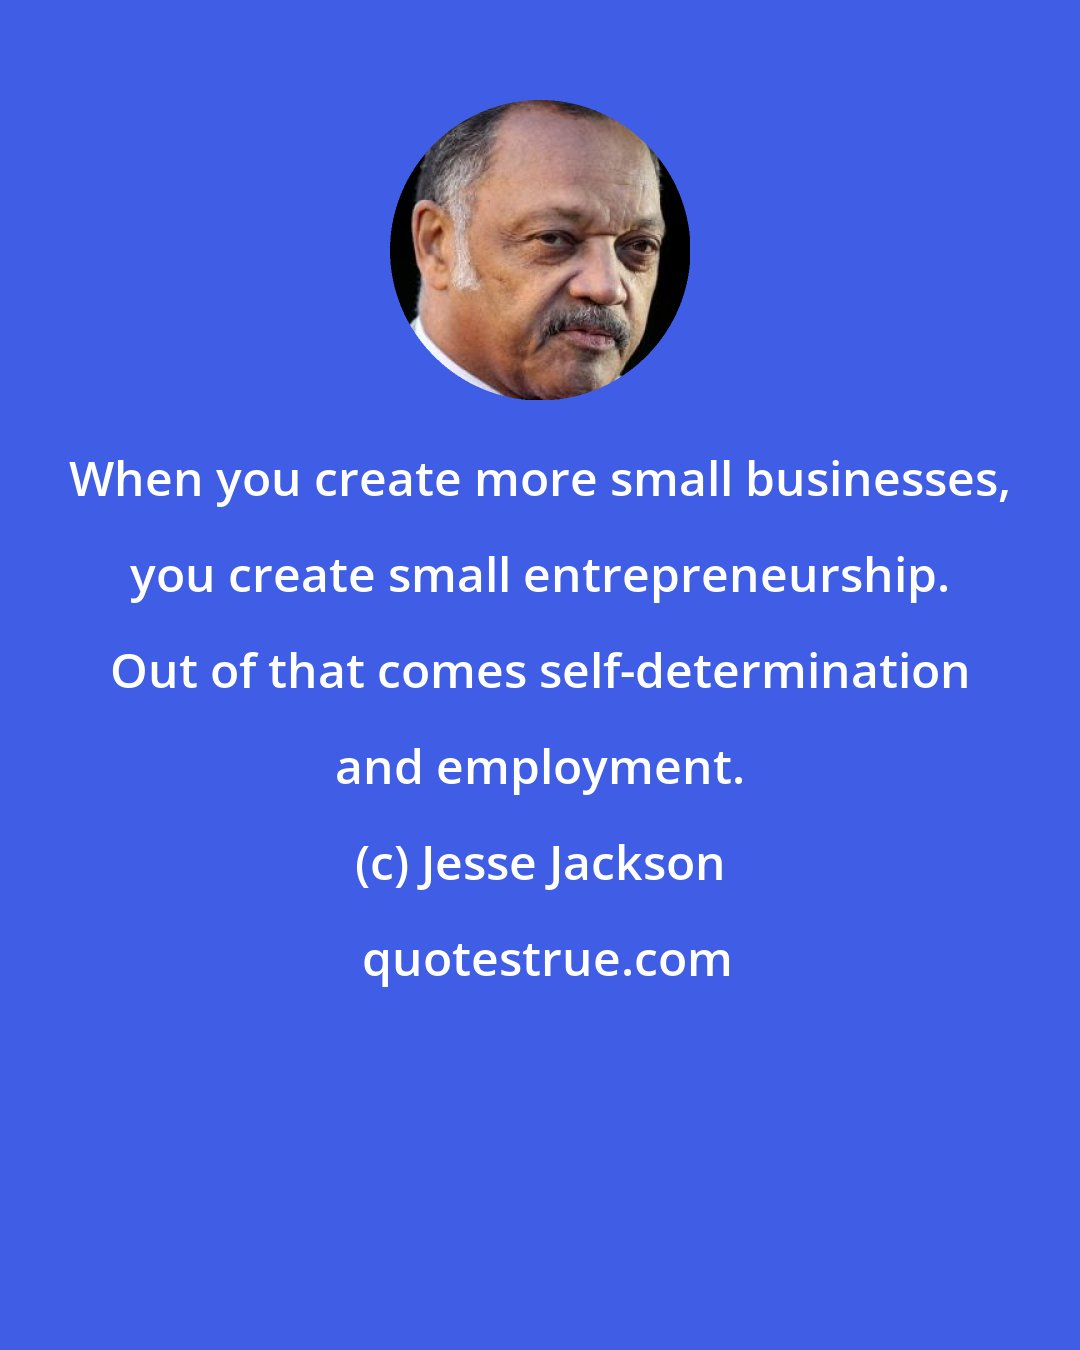 Jesse Jackson: When you create more small businesses, you create small entrepreneurship. Out of that comes self-determination and employment.